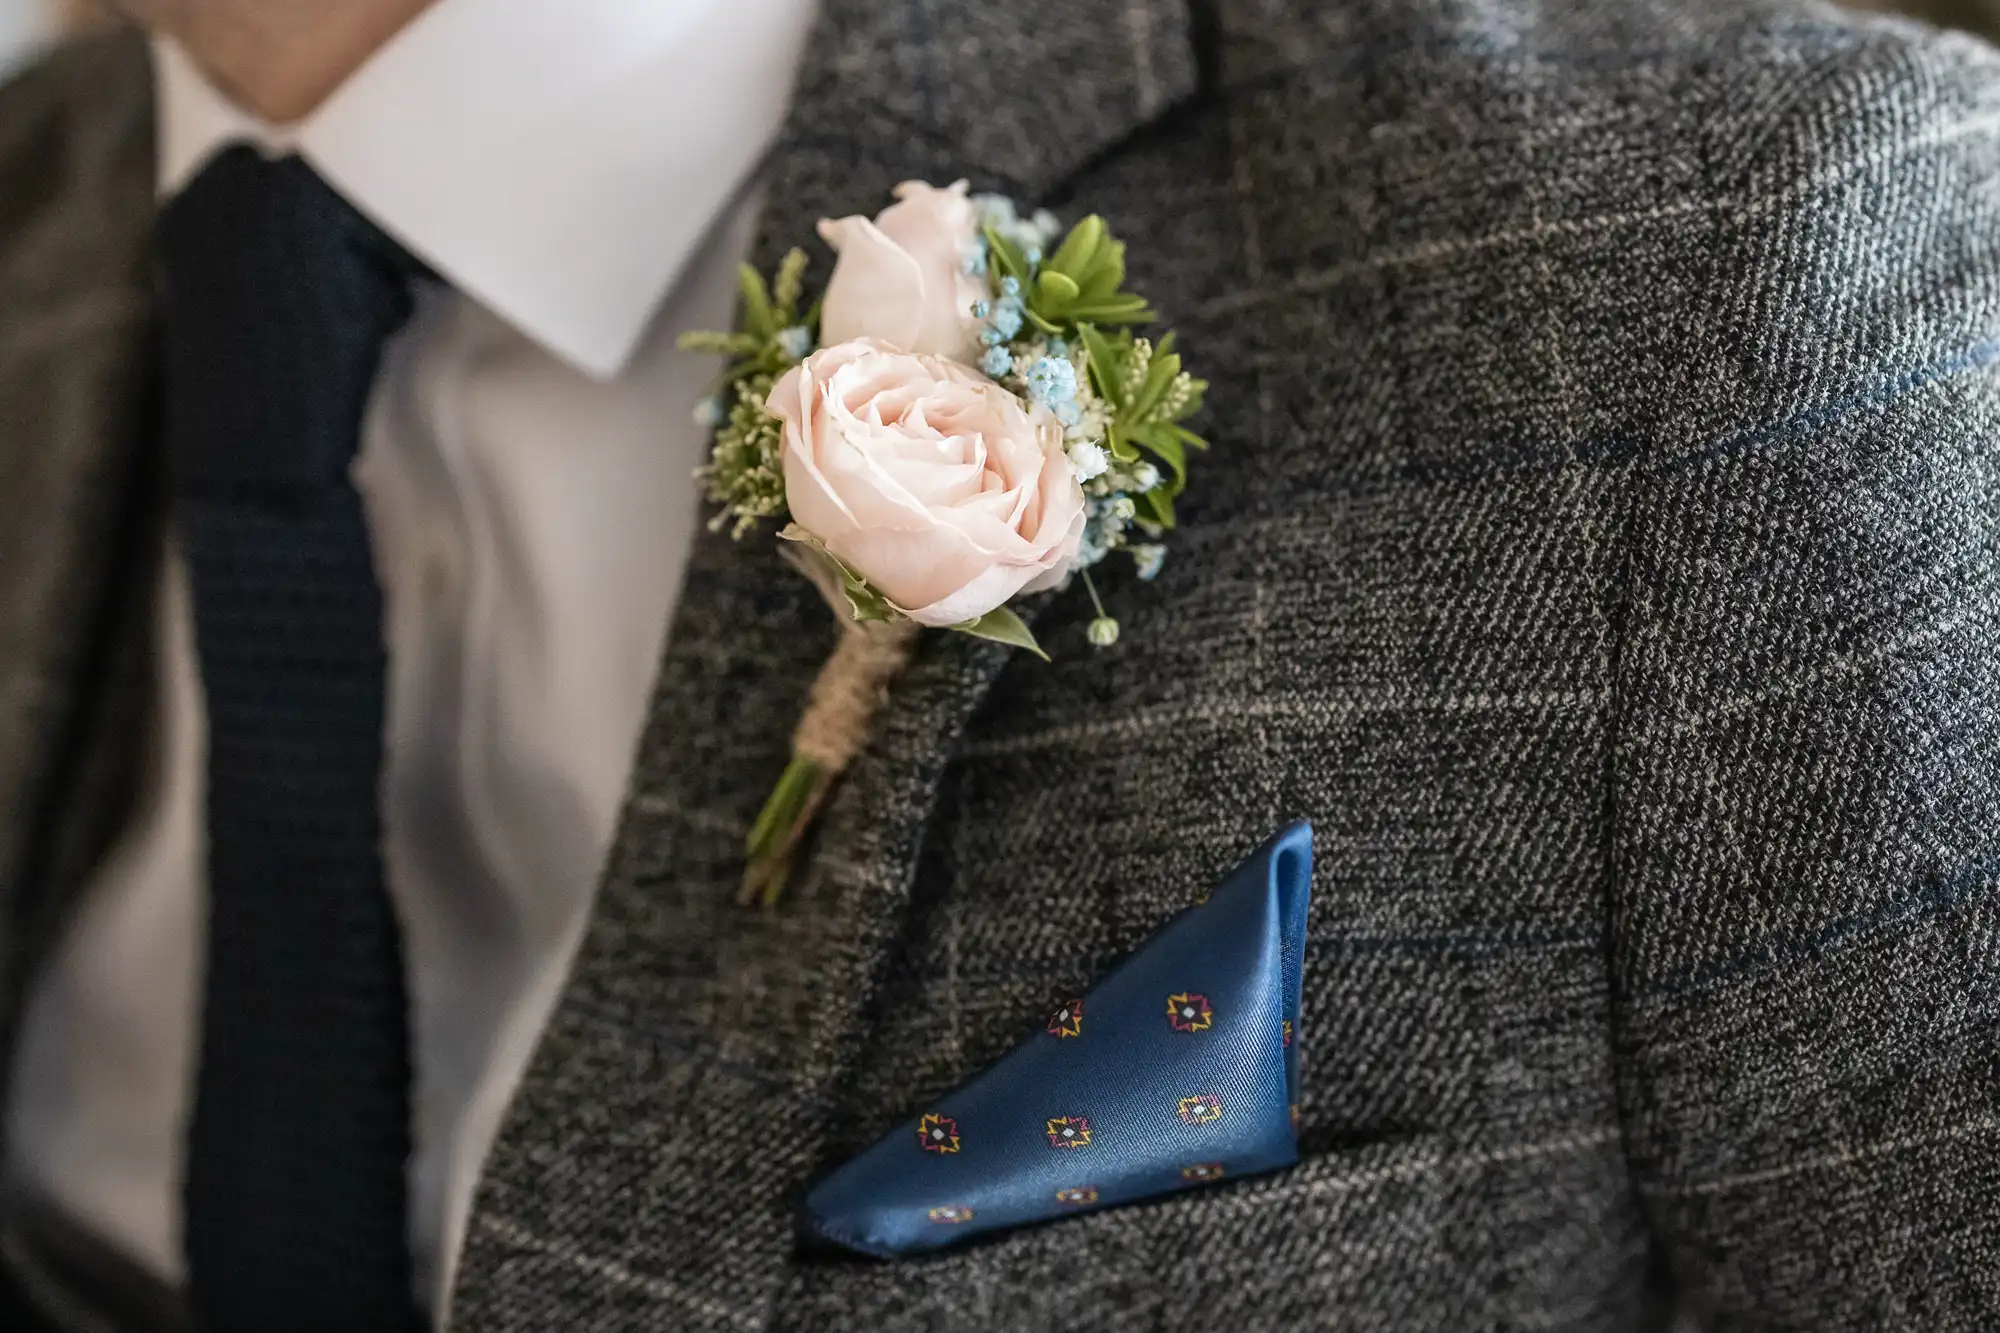 Close-up of a groom's grey tweed suit with a pink rose boutonniere and a blue pocket square with floral patterns.